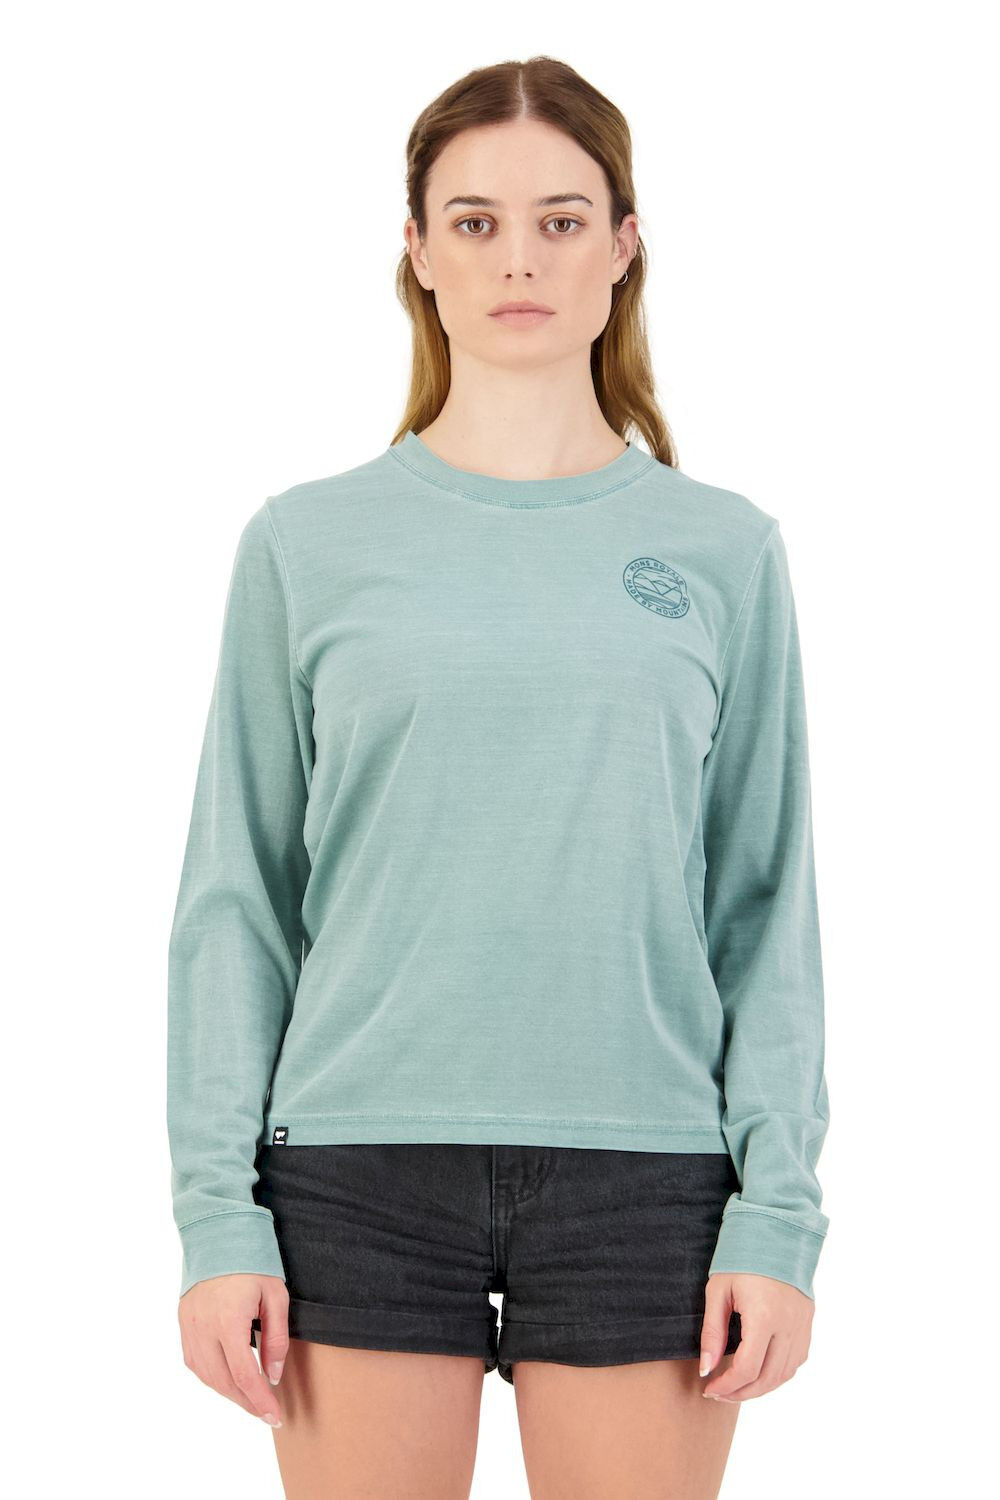 Mons Royale Icon Relaxed LS Garment Dyed - MTB jersey - Women's